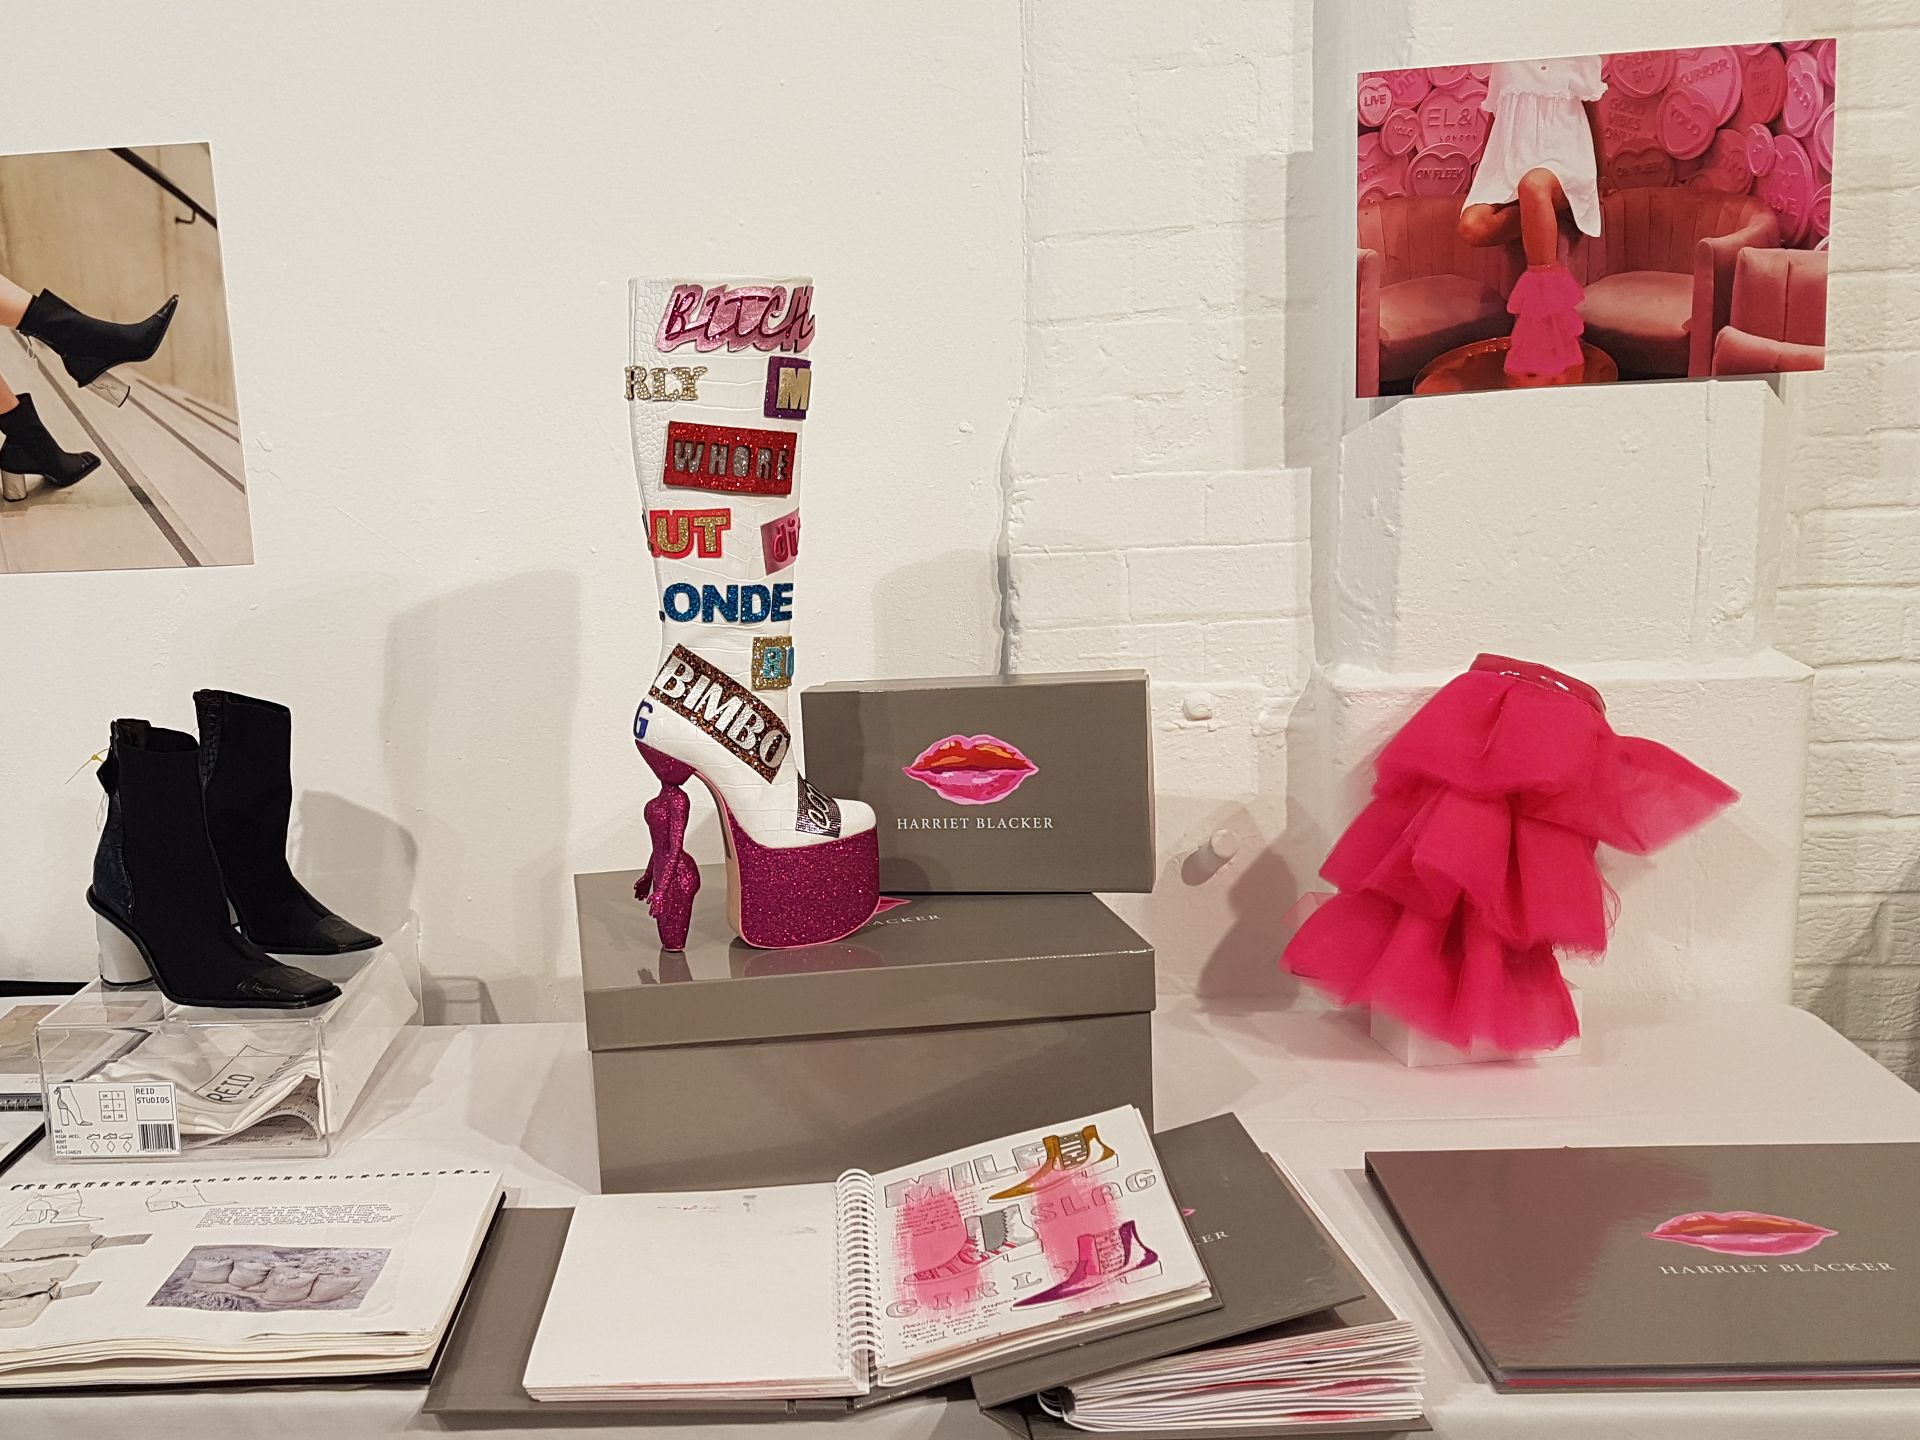 A black ankle boot with a concrete white heel stands next to a high heeled knee high boot in pink glitter which has badges on it with words like 'bitch' and 'bimbo.'